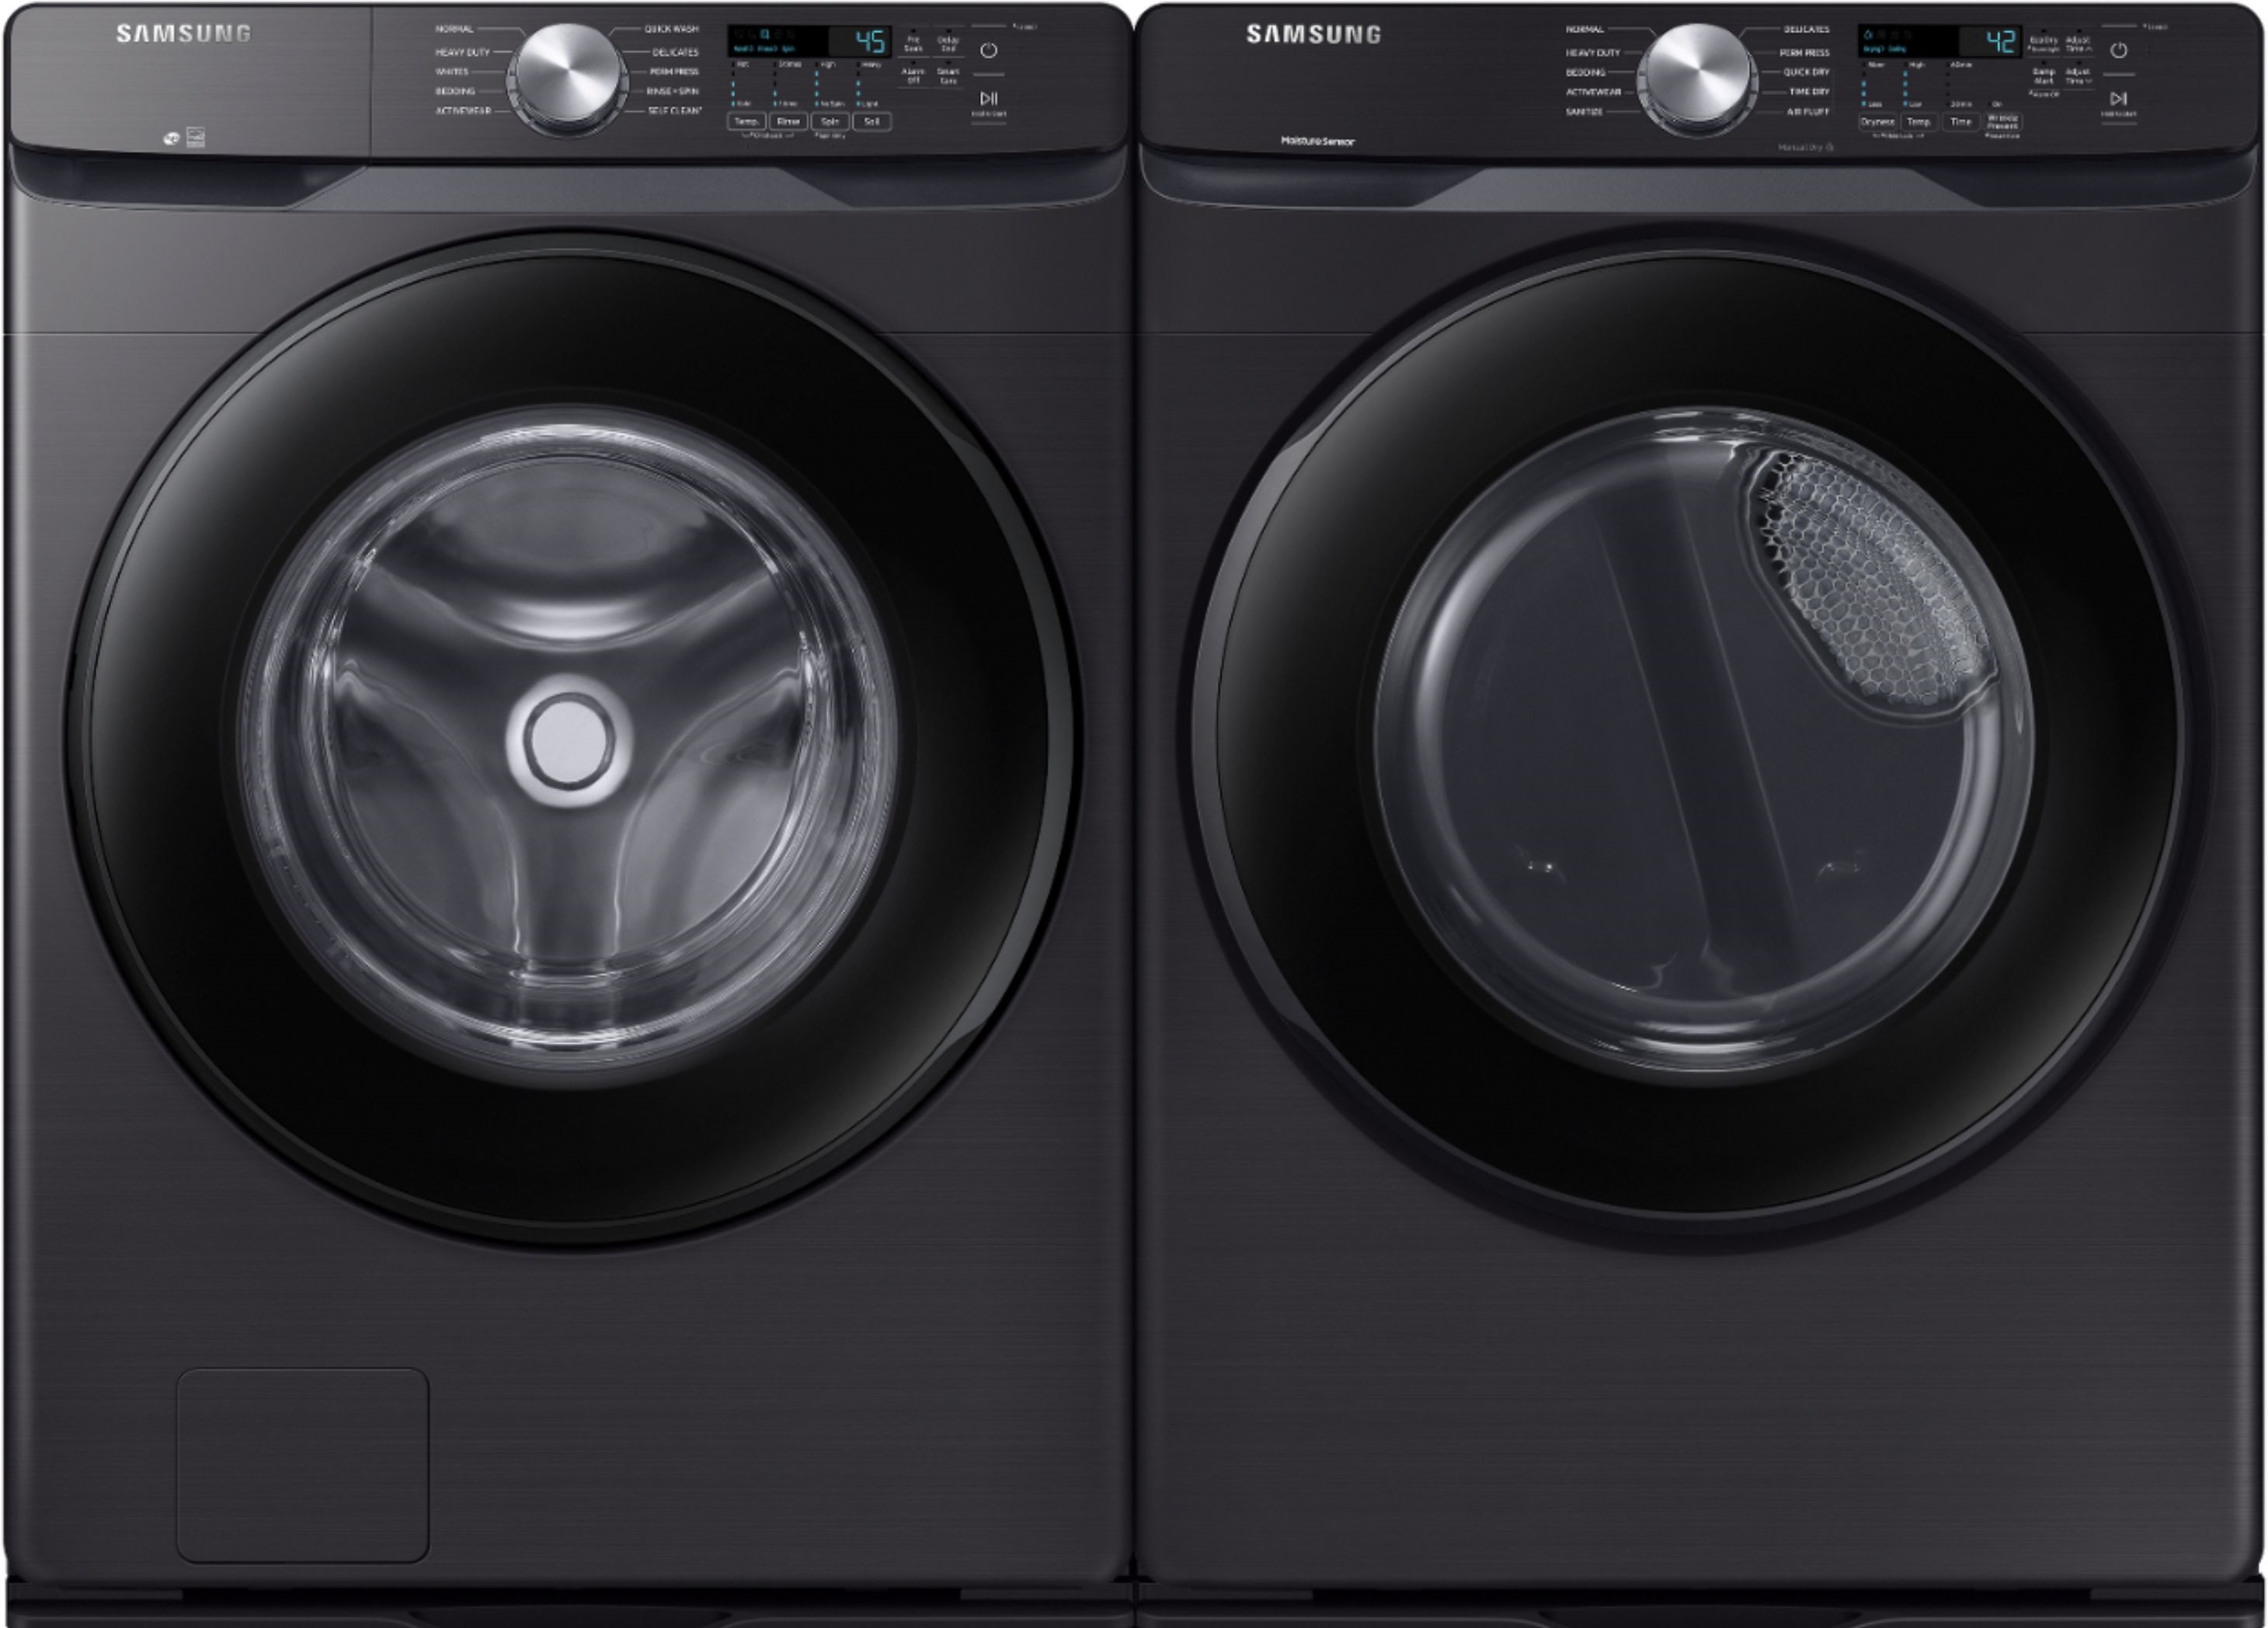 Samsung - 4.5 Cu. Ft. High Efficiency Stackable Front Load Washer & Samsung - 7.5 Cu. Ft. Stackable Electric Dryer